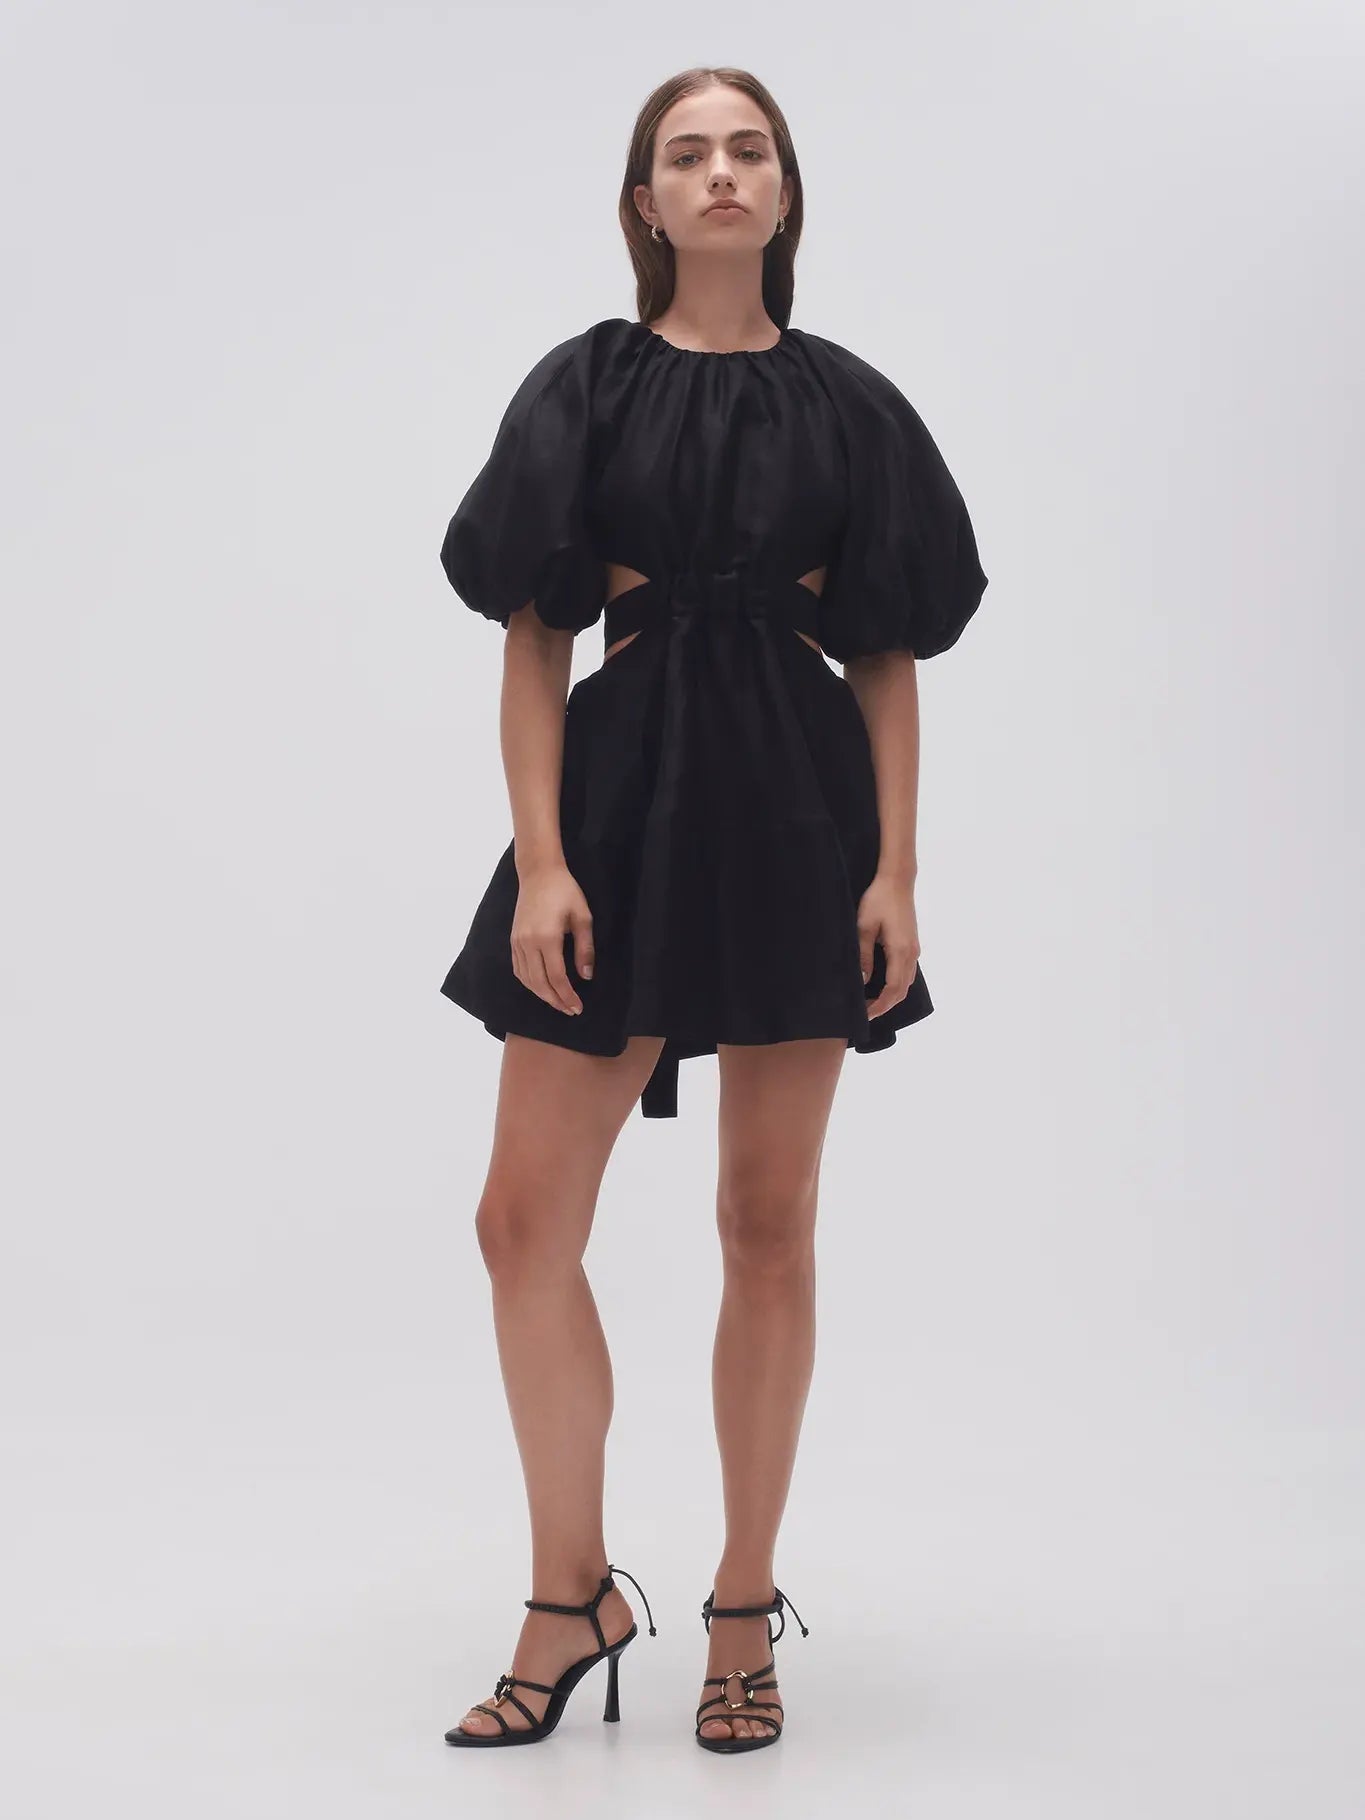 Mimosa Cut Out Mini Dress, black (carryover style)